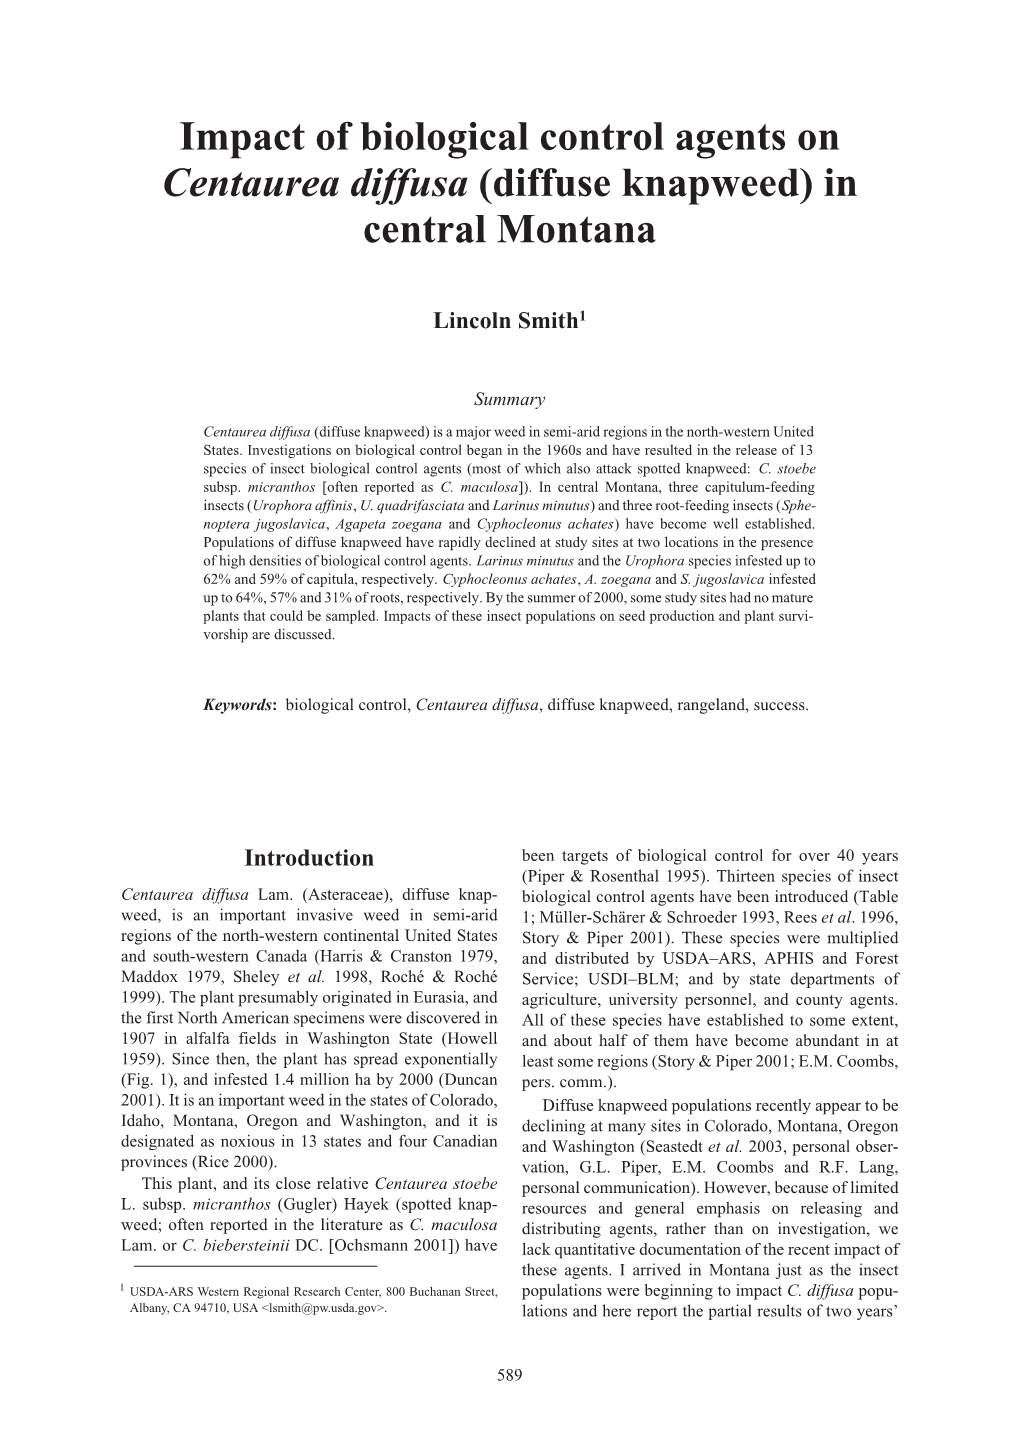 Impact of Biological Control Agents on Centaurea Diffusa (Diffuse Knapweed) in Central Montana